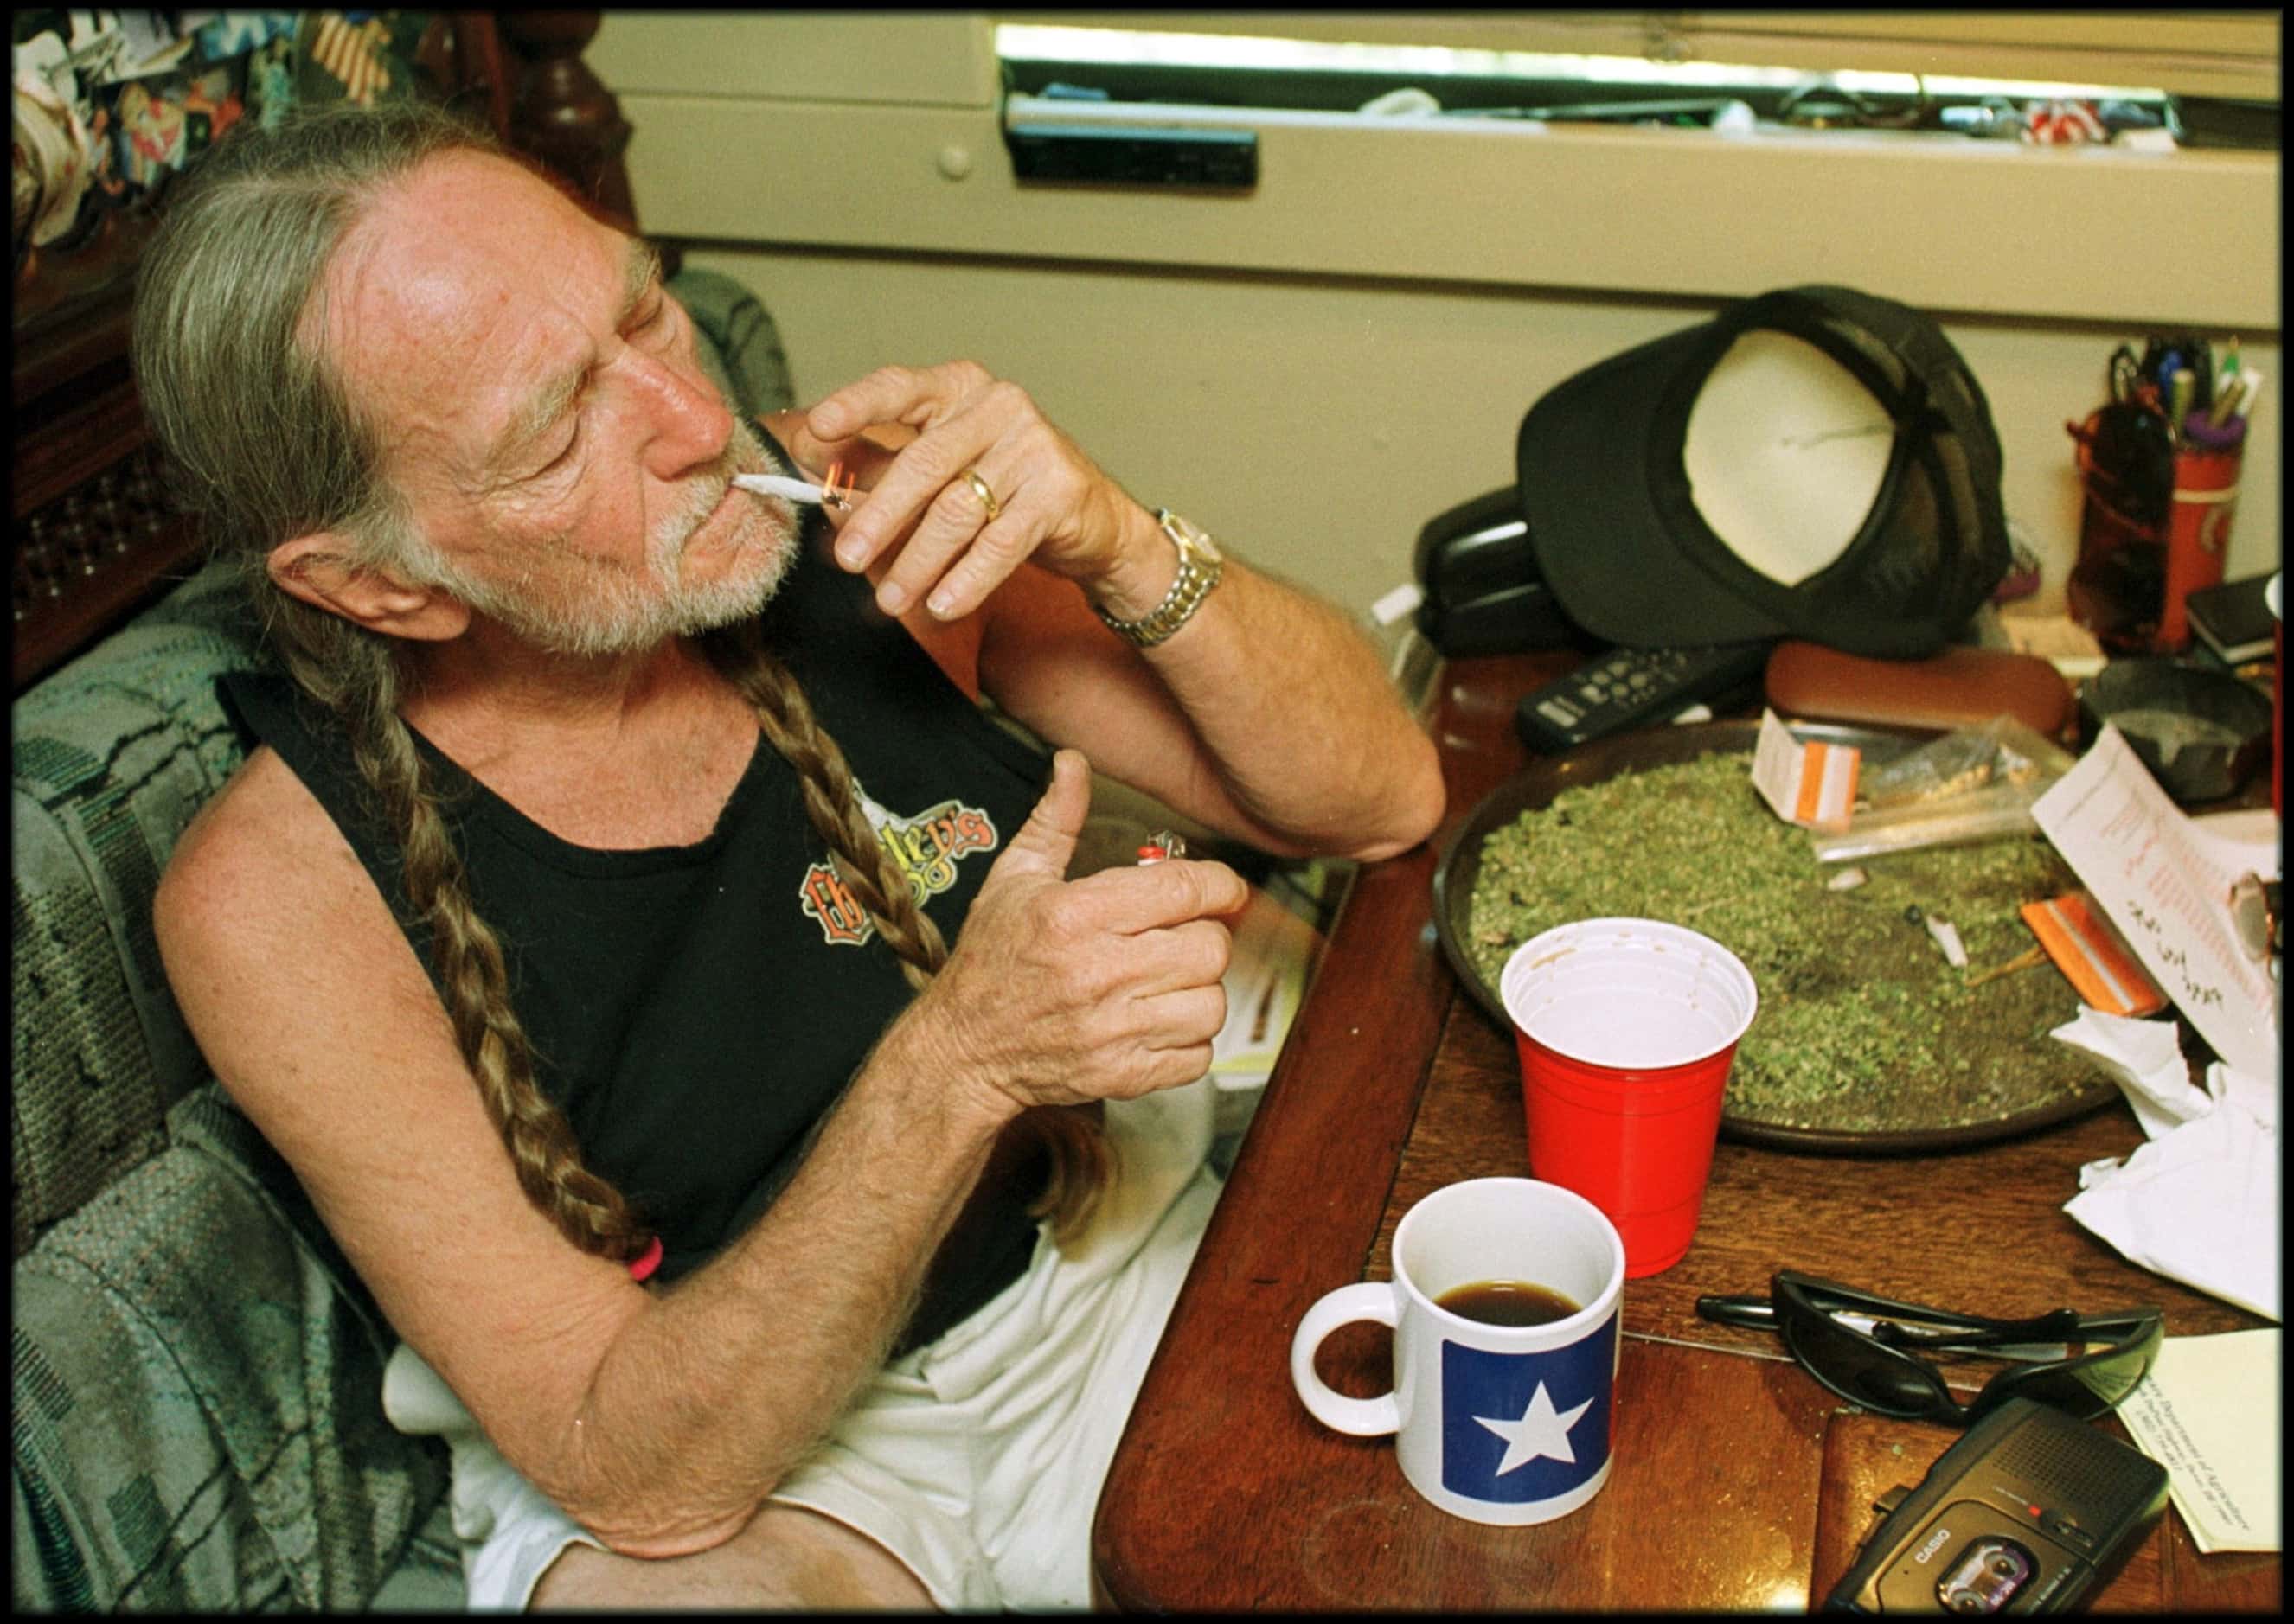 circa 2000s -  The godfather of "Outlaw Country" takes a drag off a joint while relaxing at...